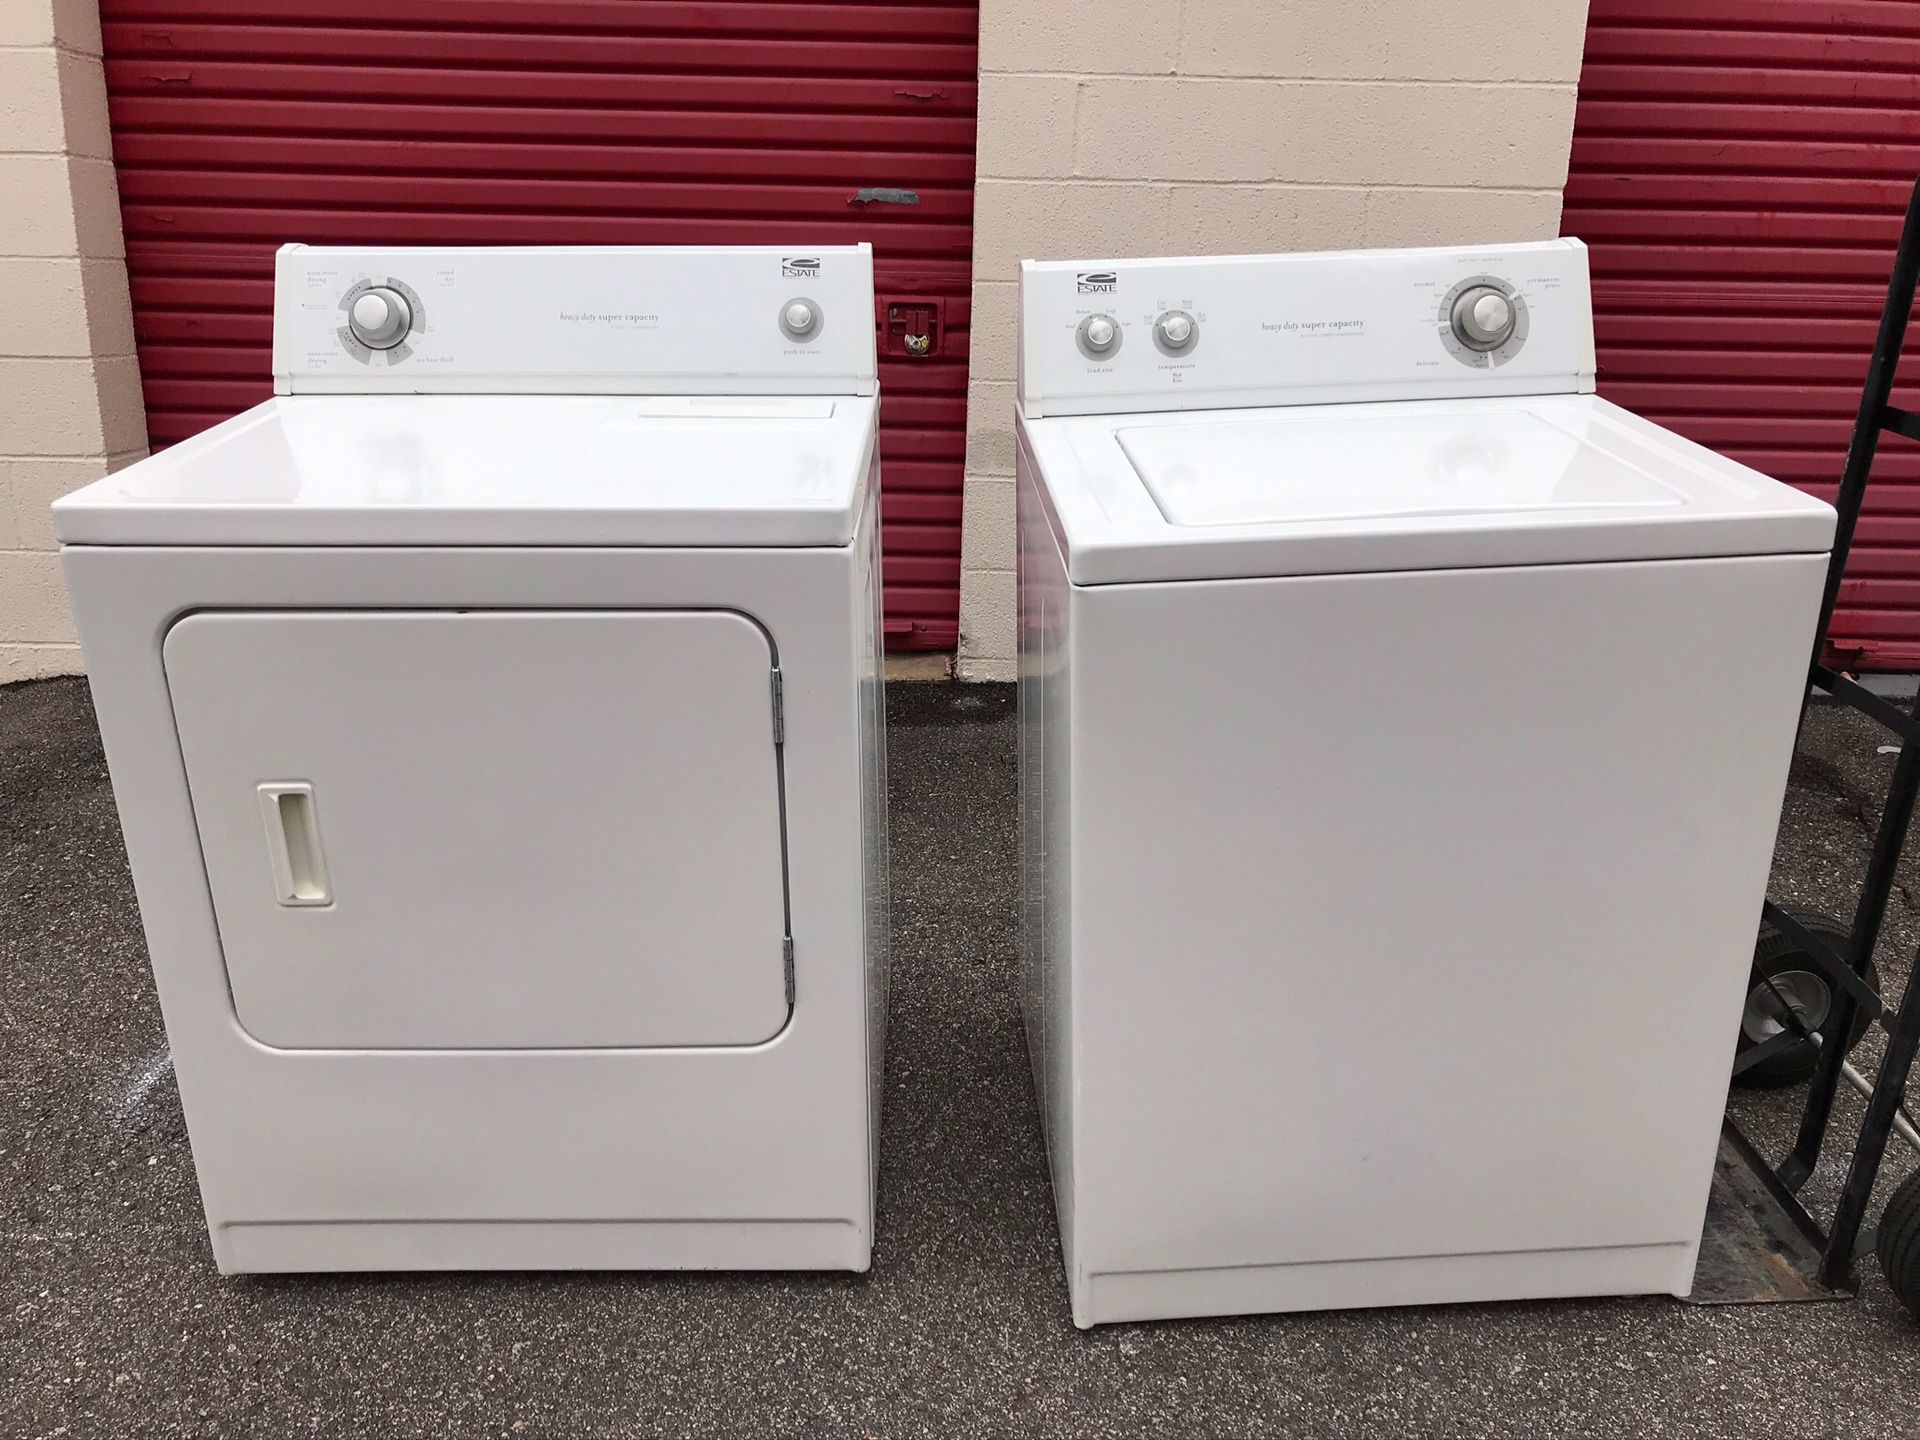 Washer and dryer Estate by whirlpool